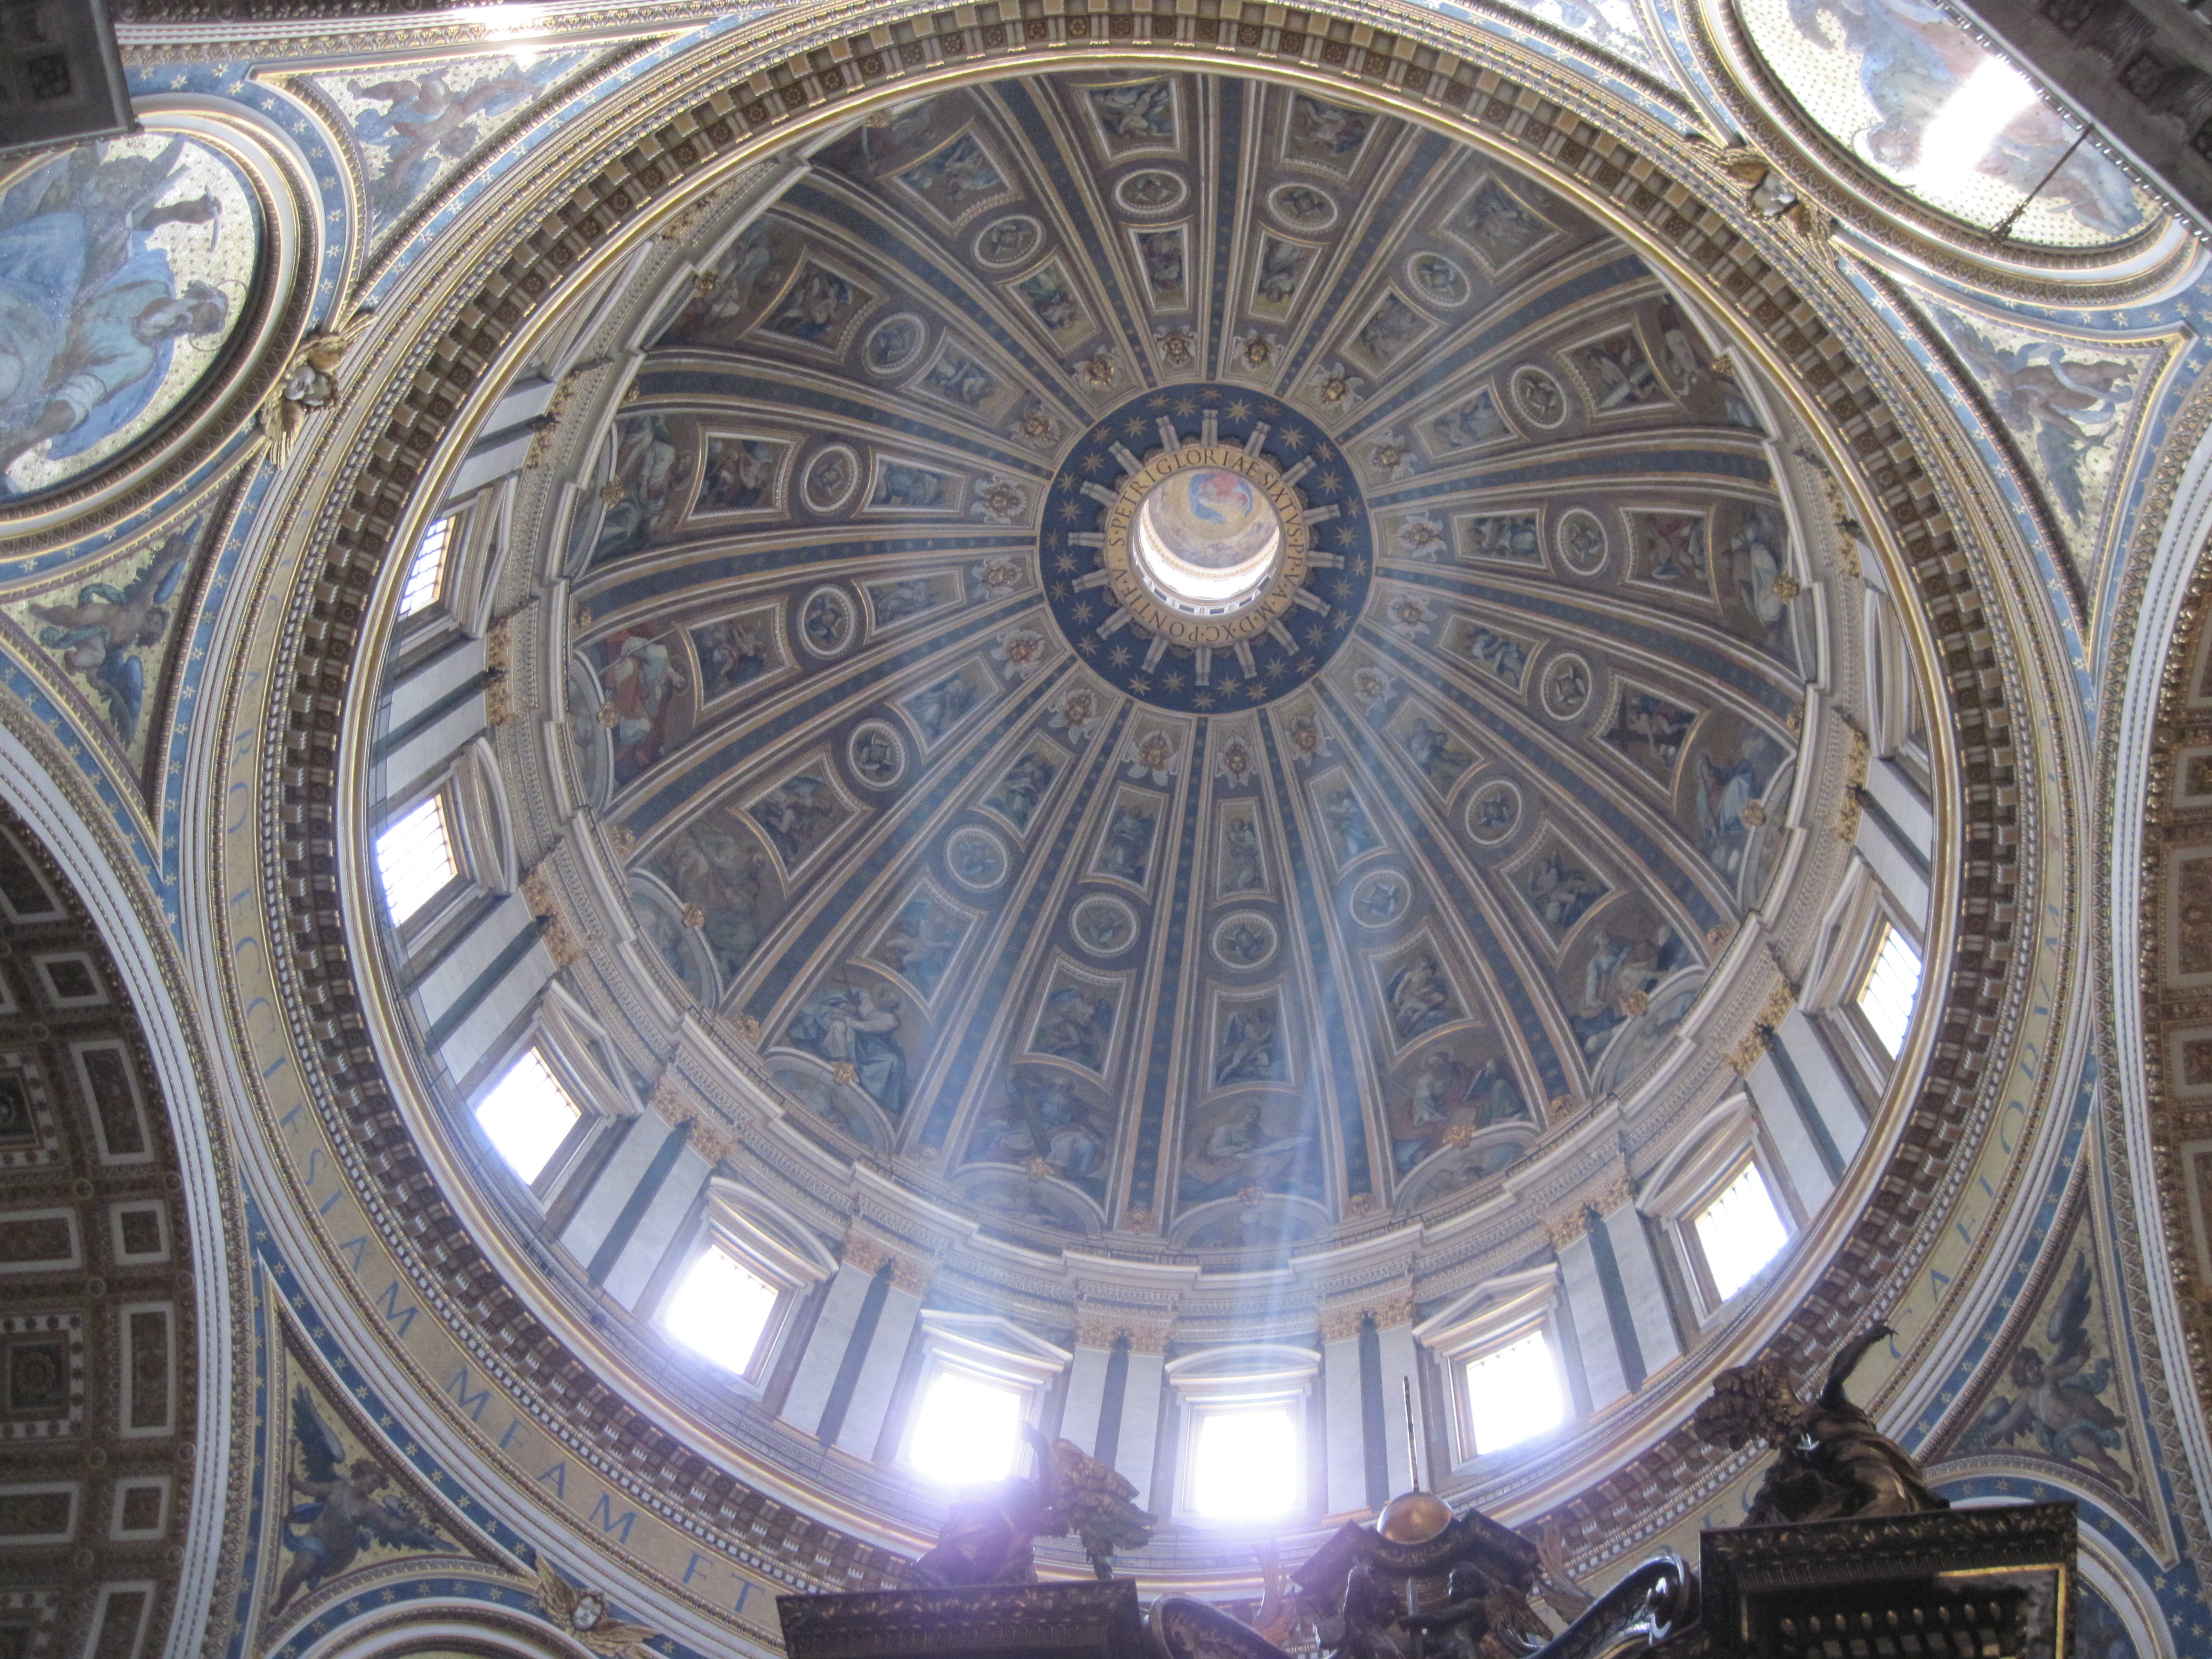 Inside st. peter's basilica in rome photo